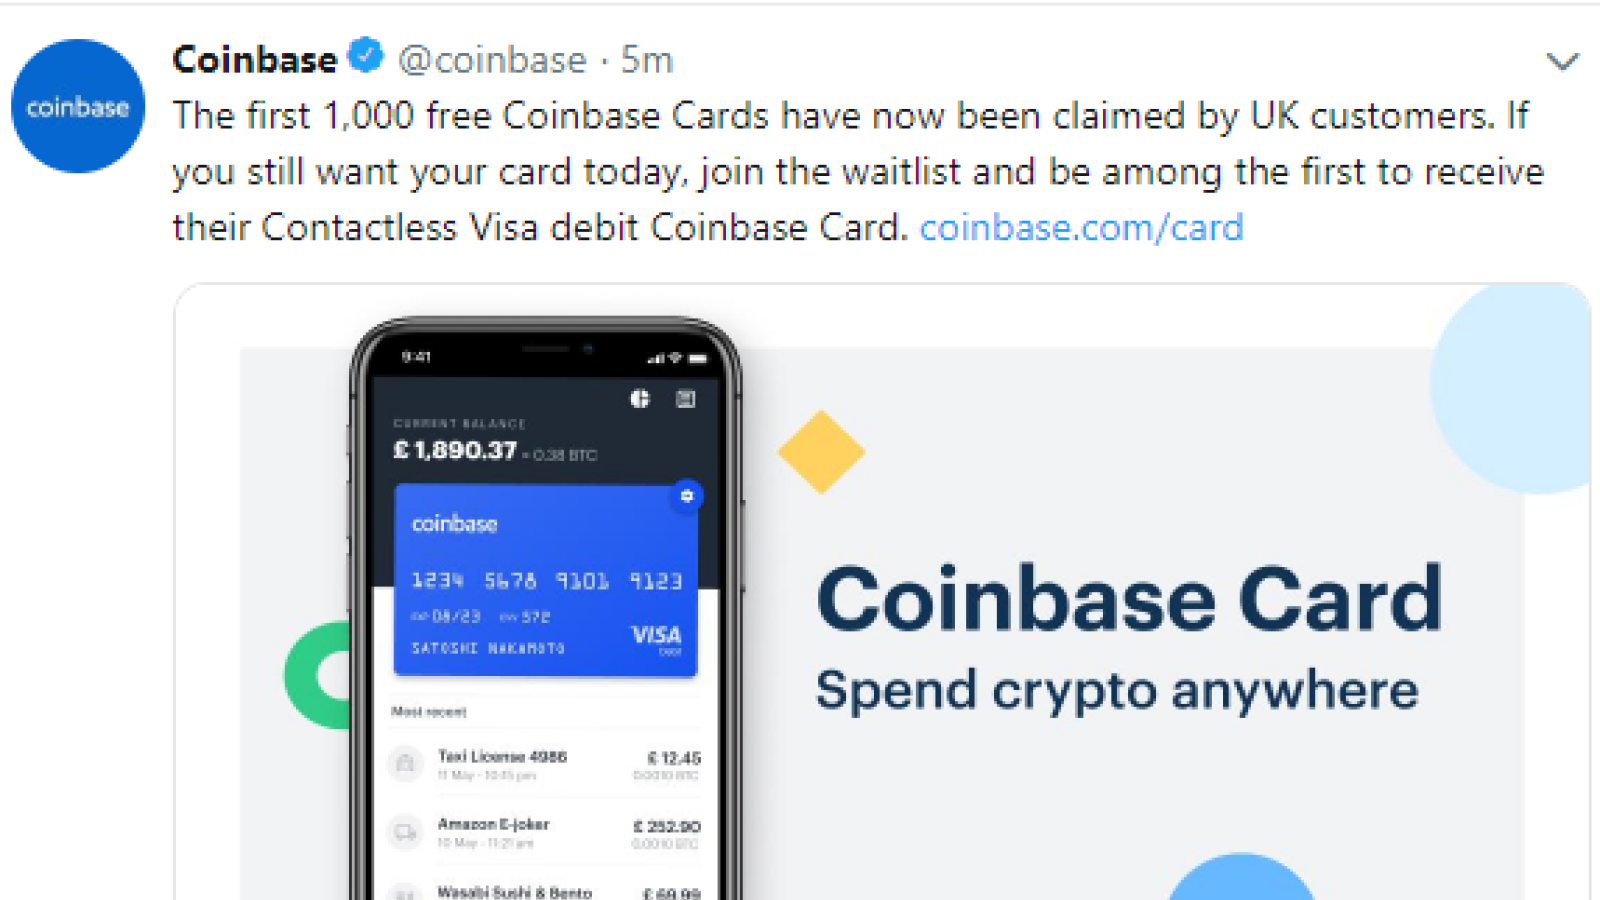 Coinbase heads for wide crypto adoption